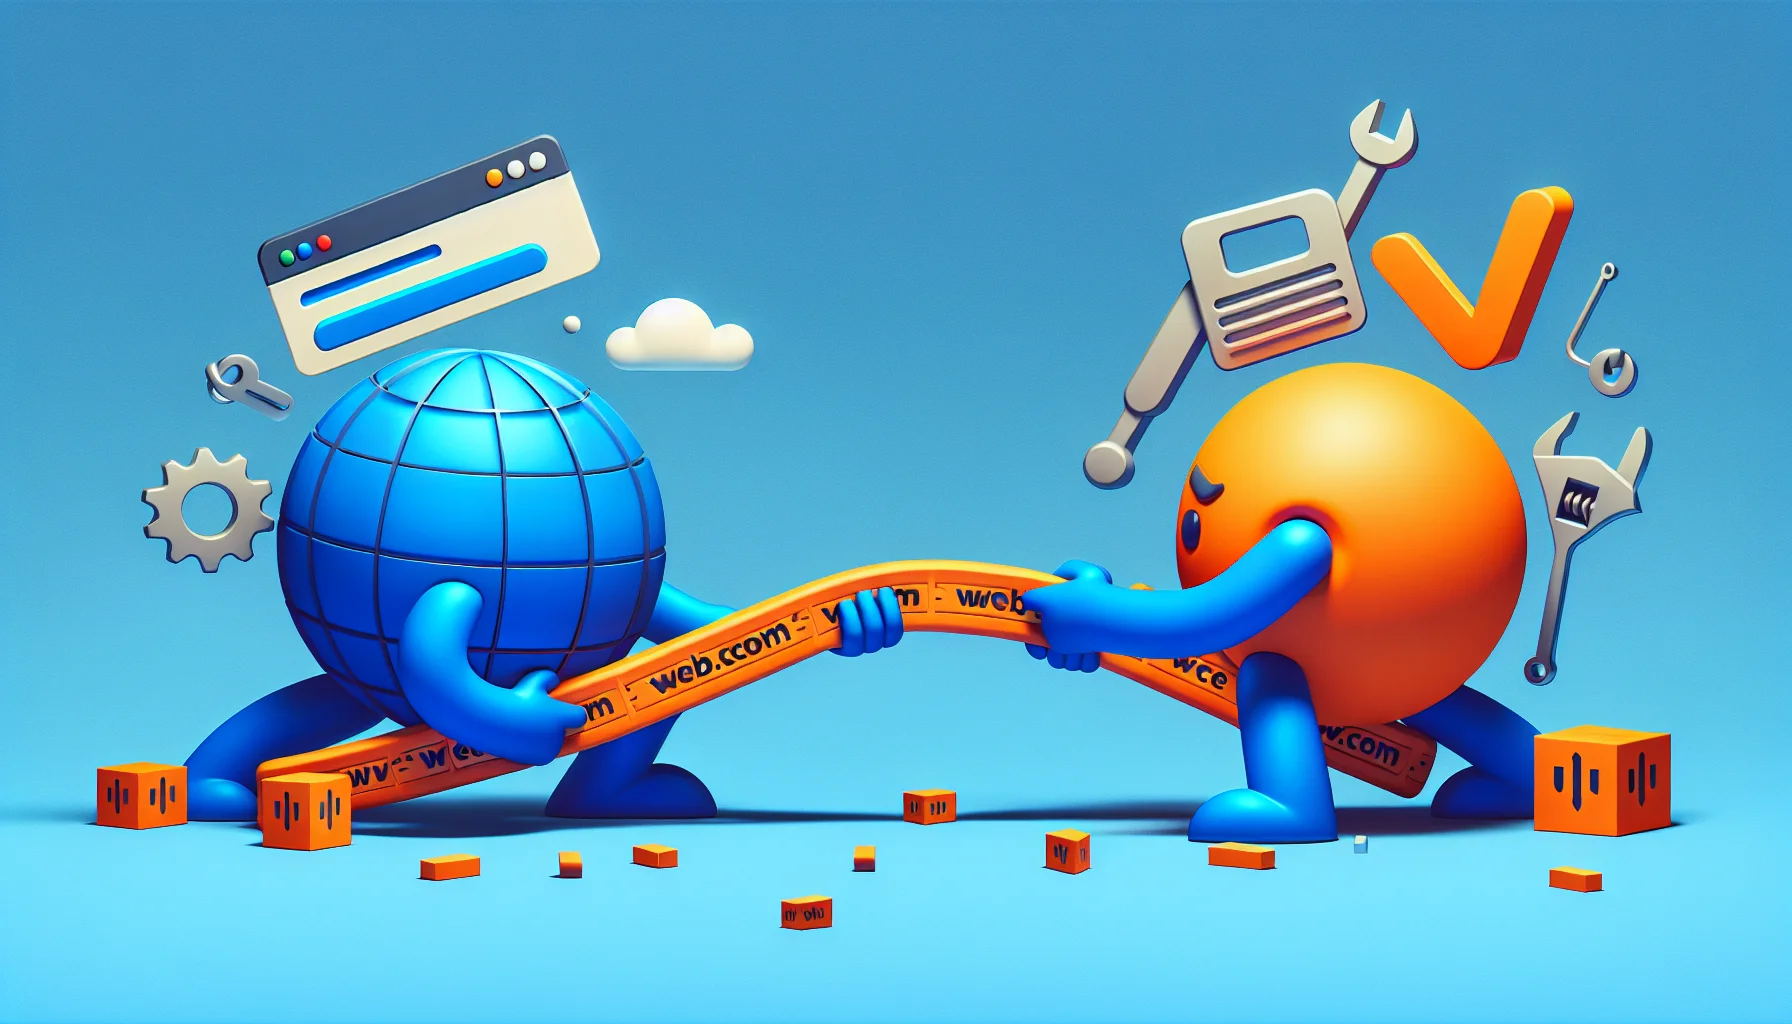 Generate a comical image that portrays a competitive scenario between two abstract conceptual characters representing two popular web hosting services: One character is stylized with features that represent 'web.com', such as a globe as the head and a blue color scheme. The other character is representative of 'Wix', with a toolkit as the head and a bright orange color theme. They engage in a playful tug-of-war over a giant line of code, an image that humorously encapsulates the competitive spirit of web hosting industry.